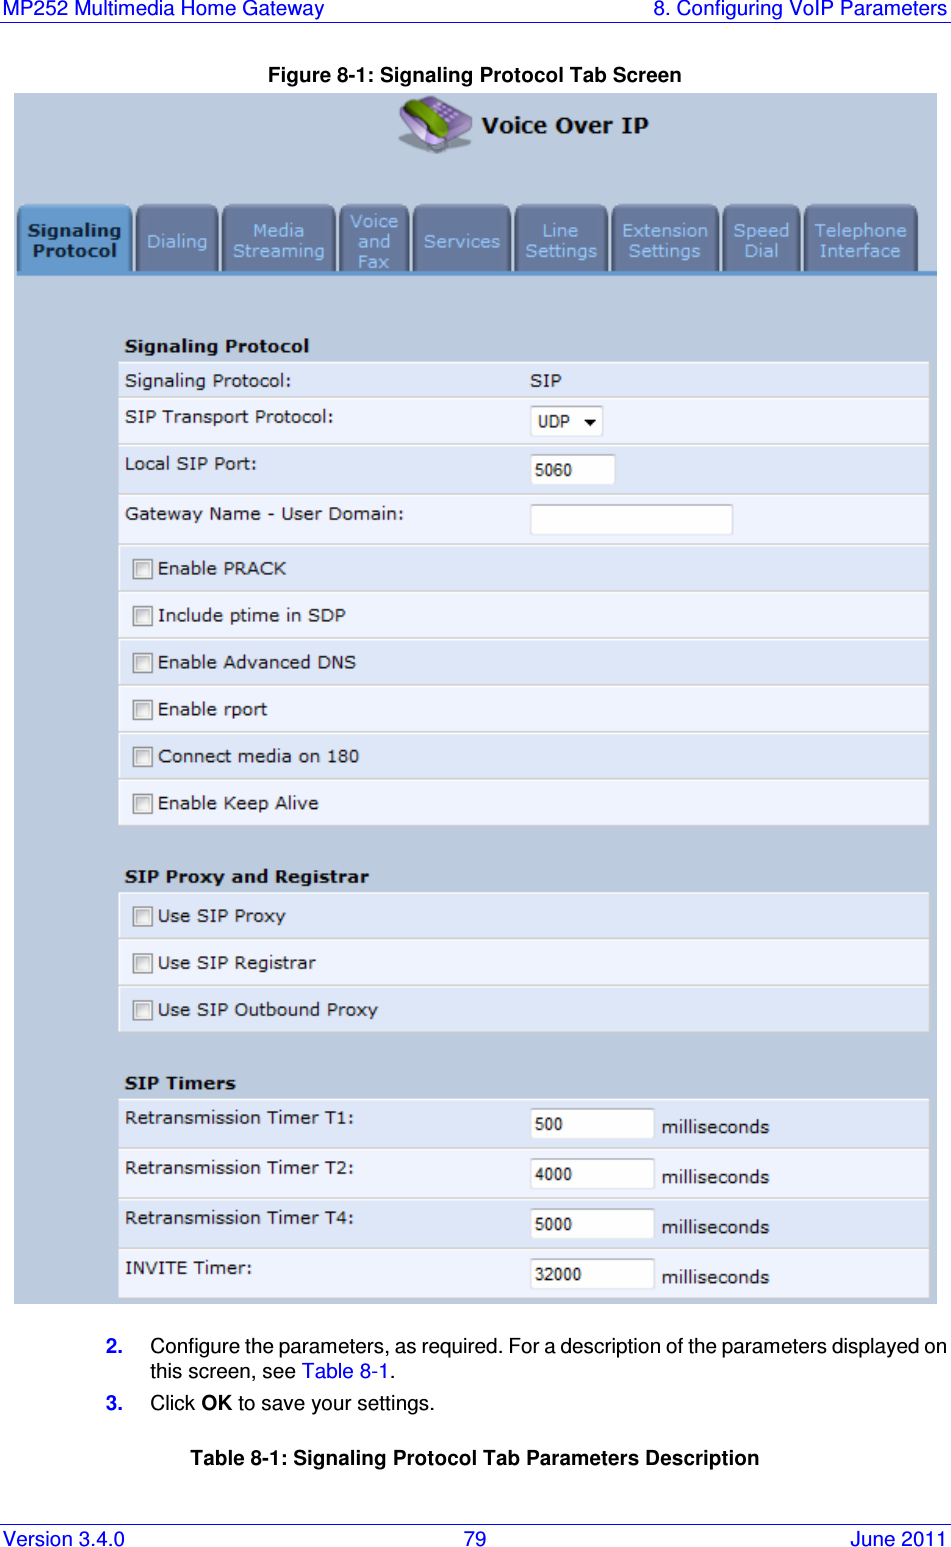 MP252 Multimedia Home Gateway  8. Configuring VoIP Parameters Version 3.4.0  79  June 2011 Figure 8-1: Signaling Protocol Tab Screen  2.  Configure the parameters, as required. For a description of the parameters displayed on this screen, see Table 8-1. 3.  Click OK to save your settings. Table 8-1: Signaling Protocol Tab Parameters Description 